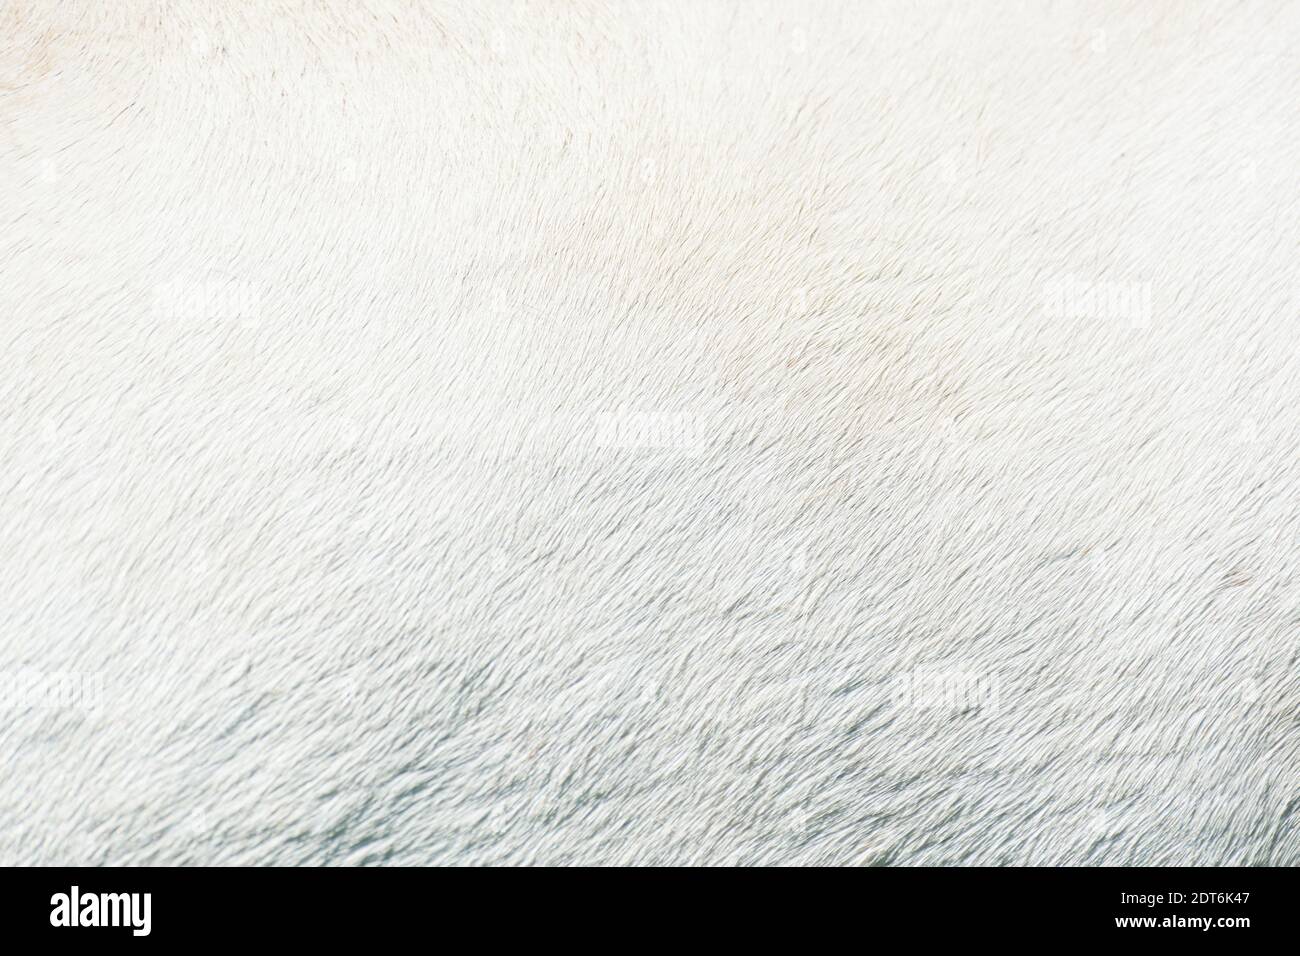 Horse pelage texture in white color. Stock Photo